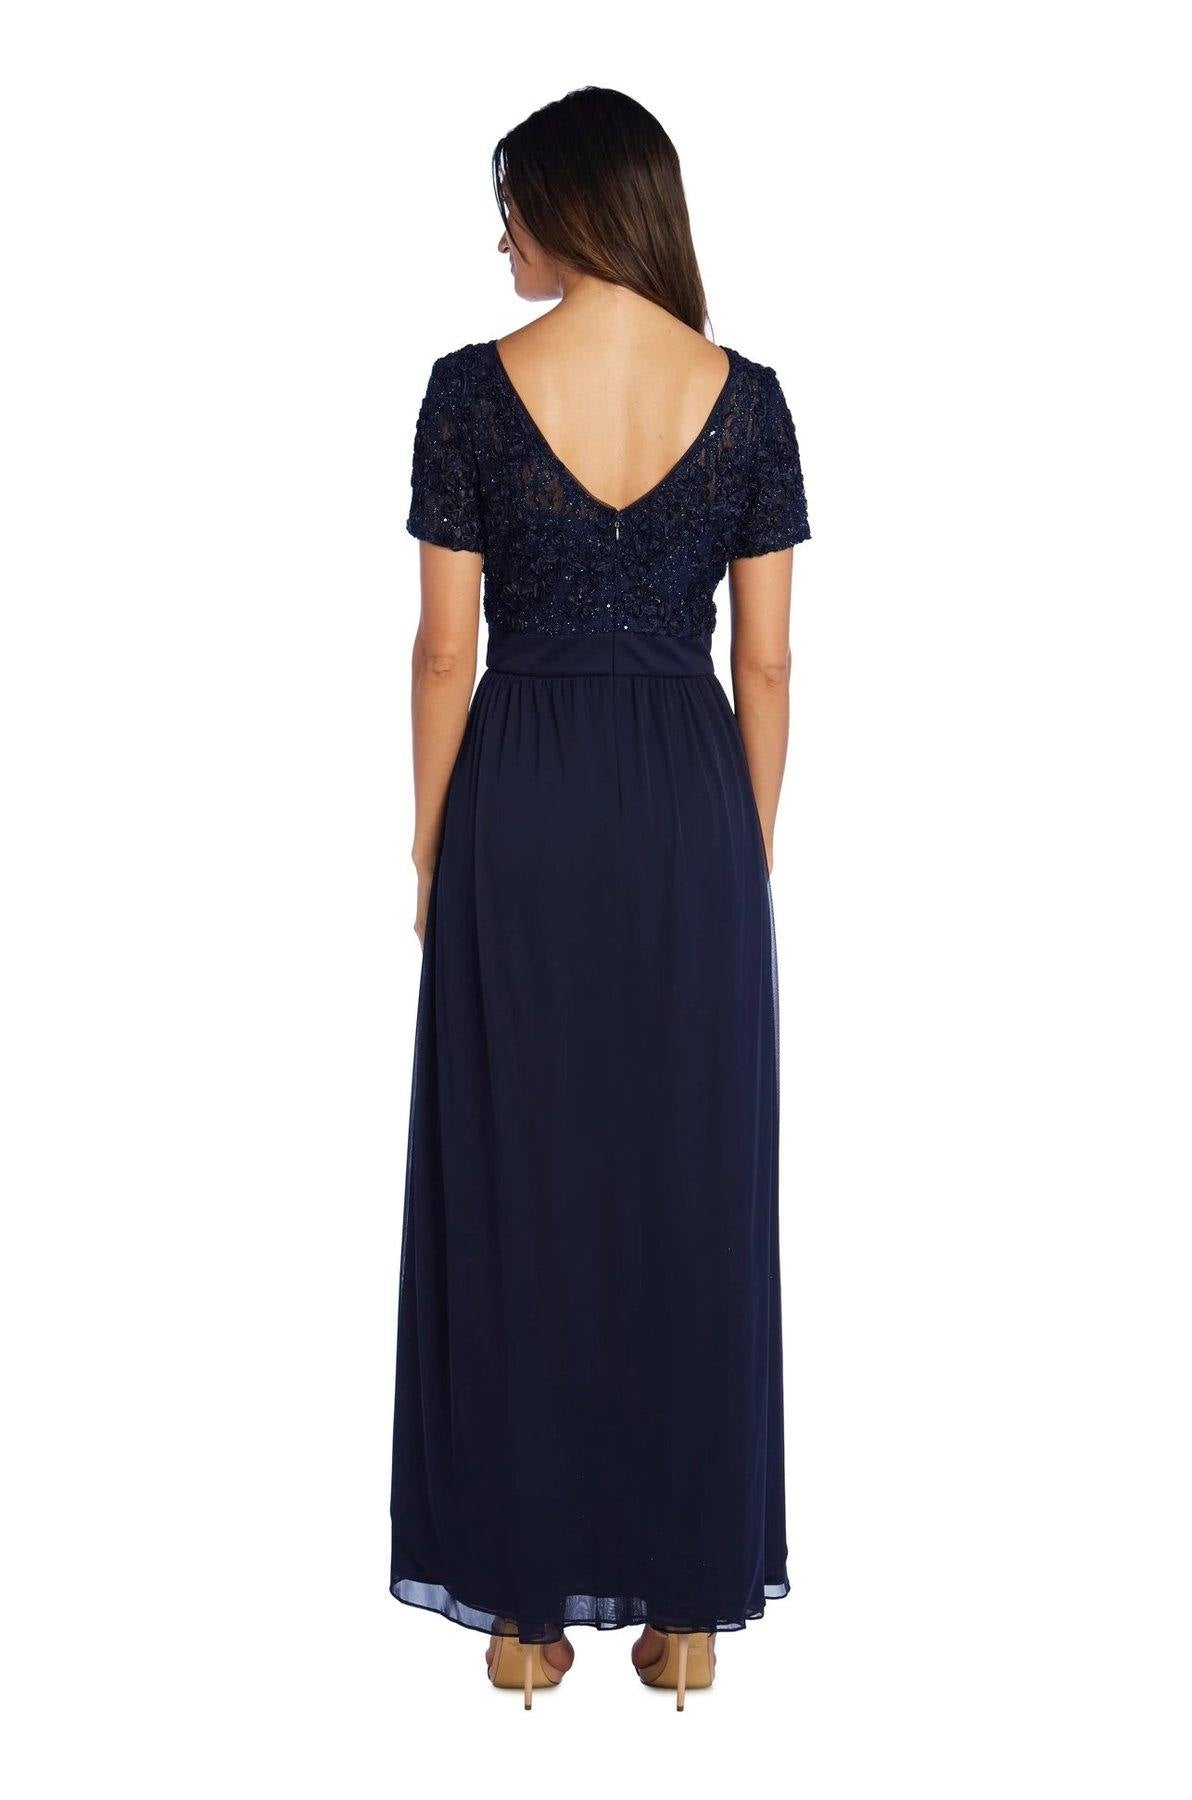 Navy R&M Richards 5516 Short Sleeve Mother Of The Bride Dress for $96. ...